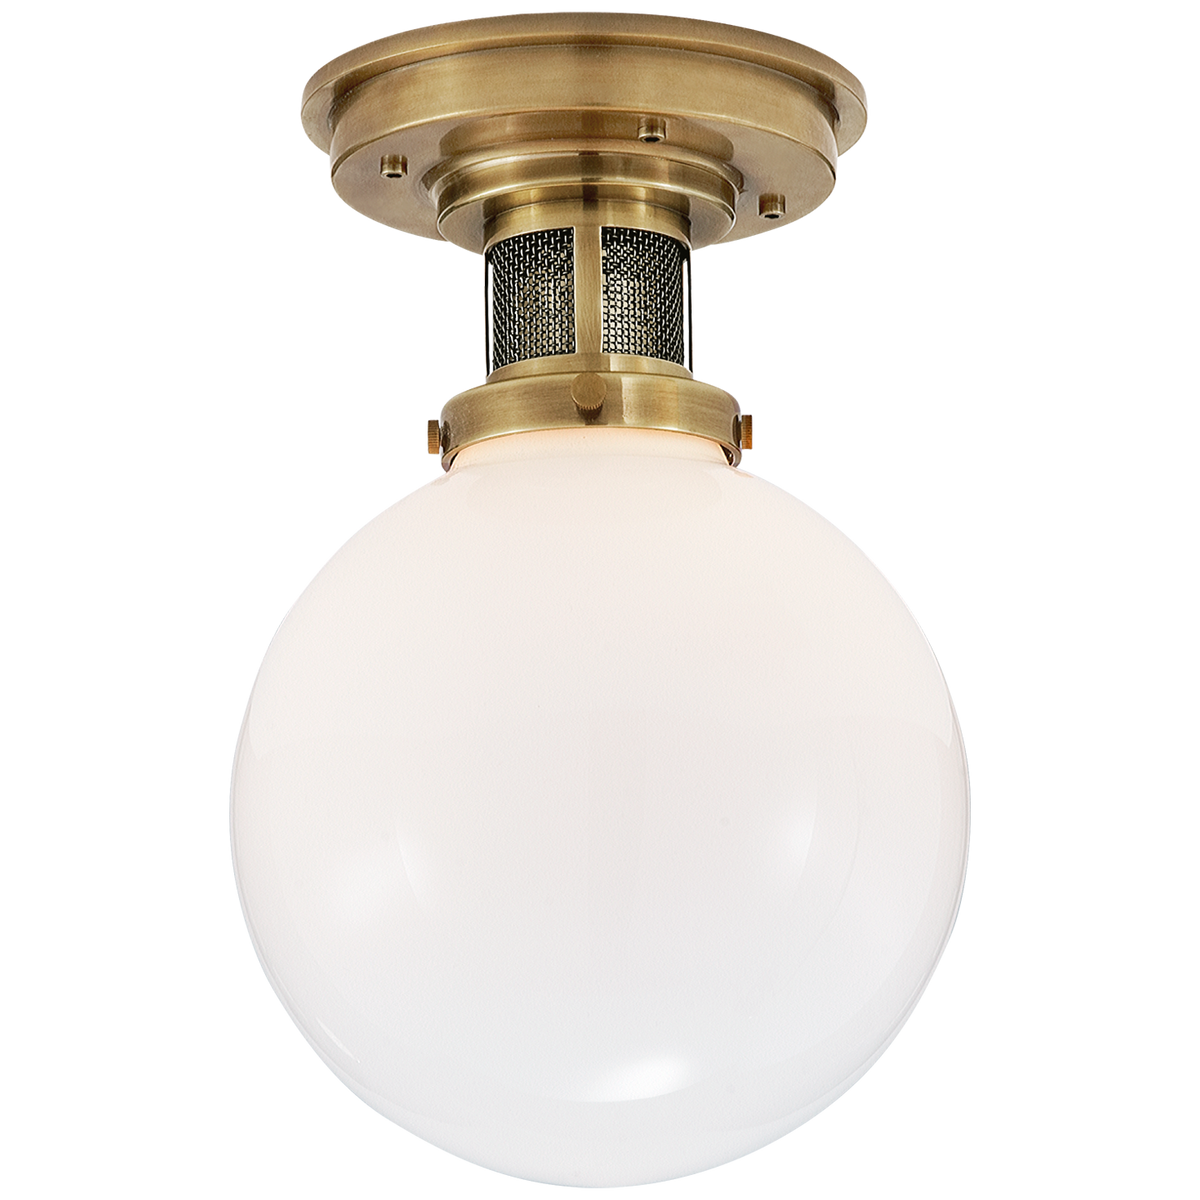 McCarren Flush Mount Small - Natural Brass with White Glass